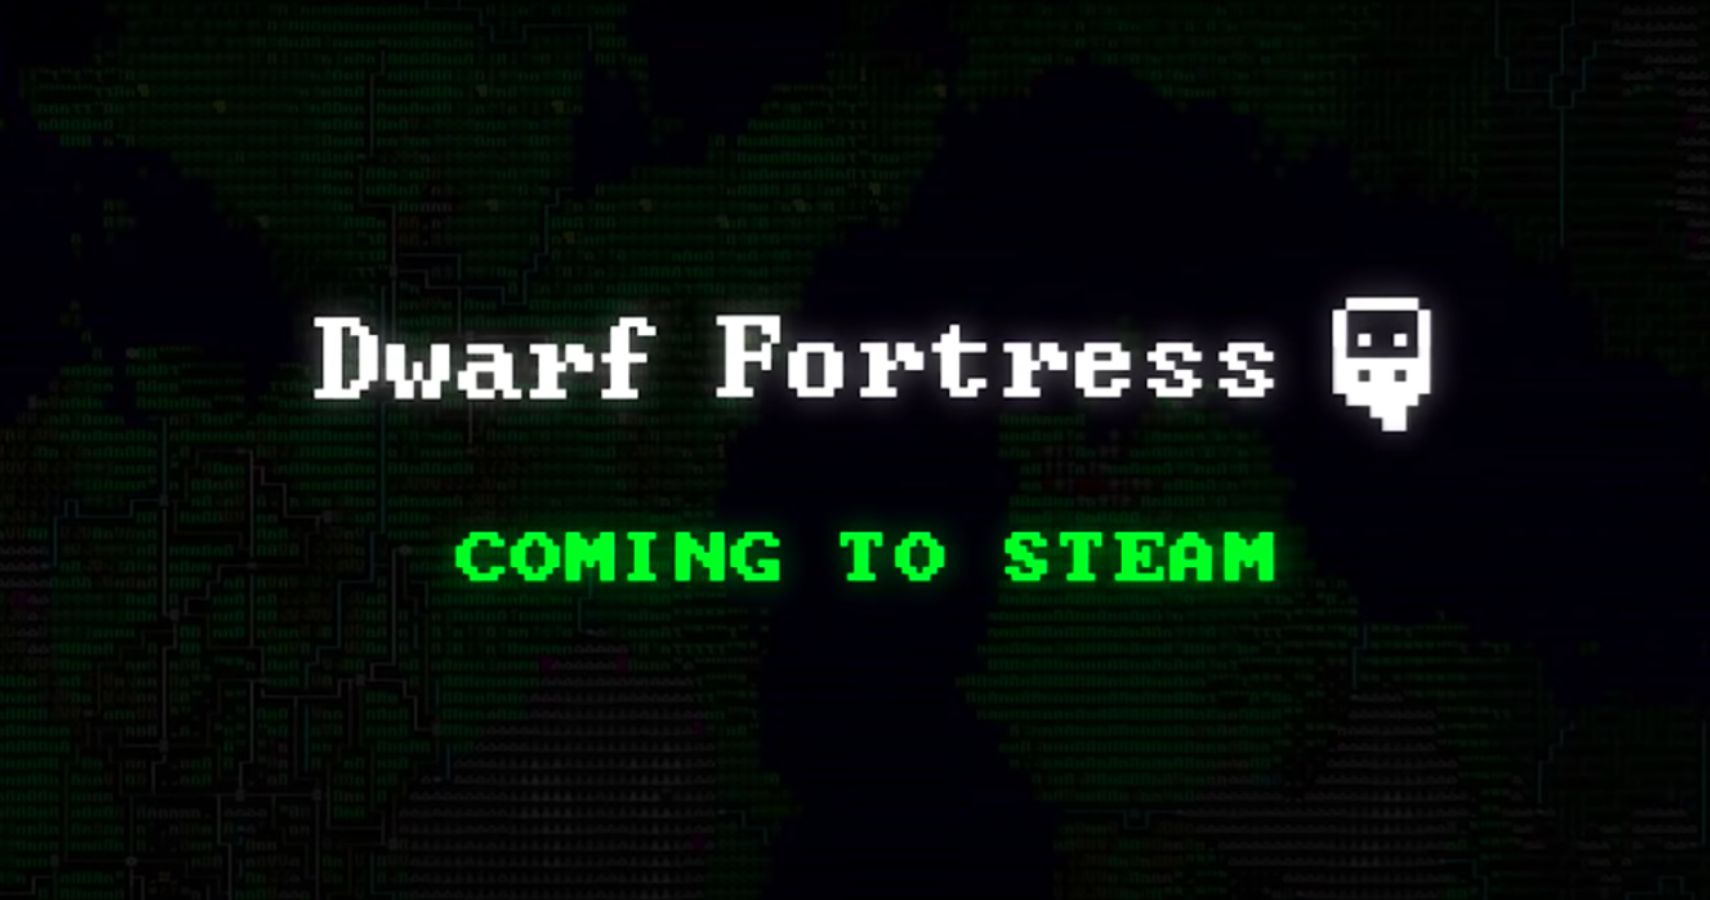 new game based off of dwarf fortress steam